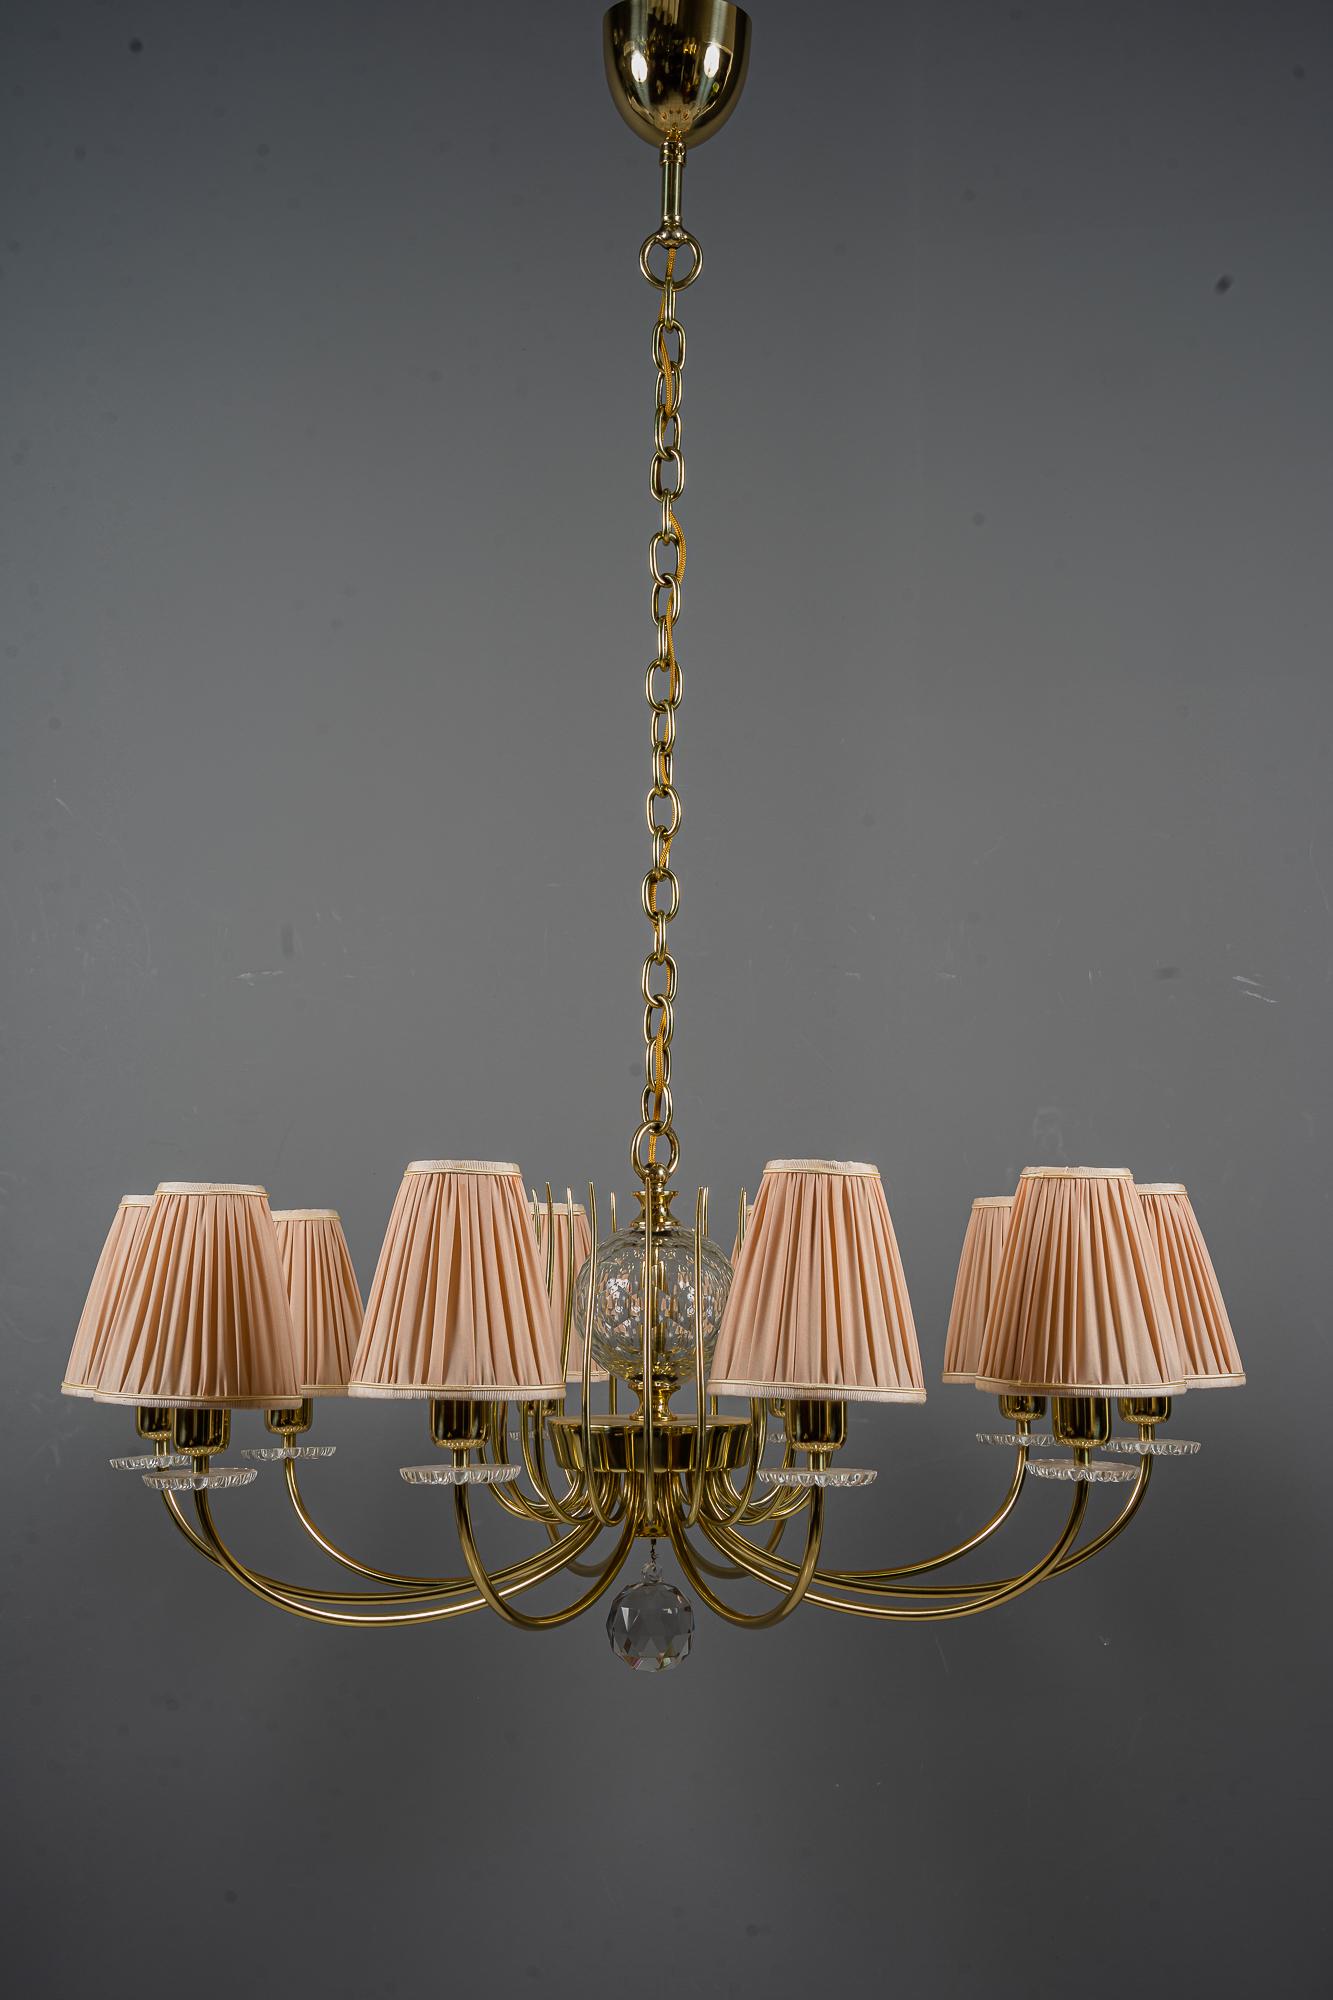 Lobmeyr chandelier Vienna, around 1950s.
Polished and stove enameled.
Original cut glasses.
The shades are replaced (new).
The height is easily to change by replacing the chain parts.